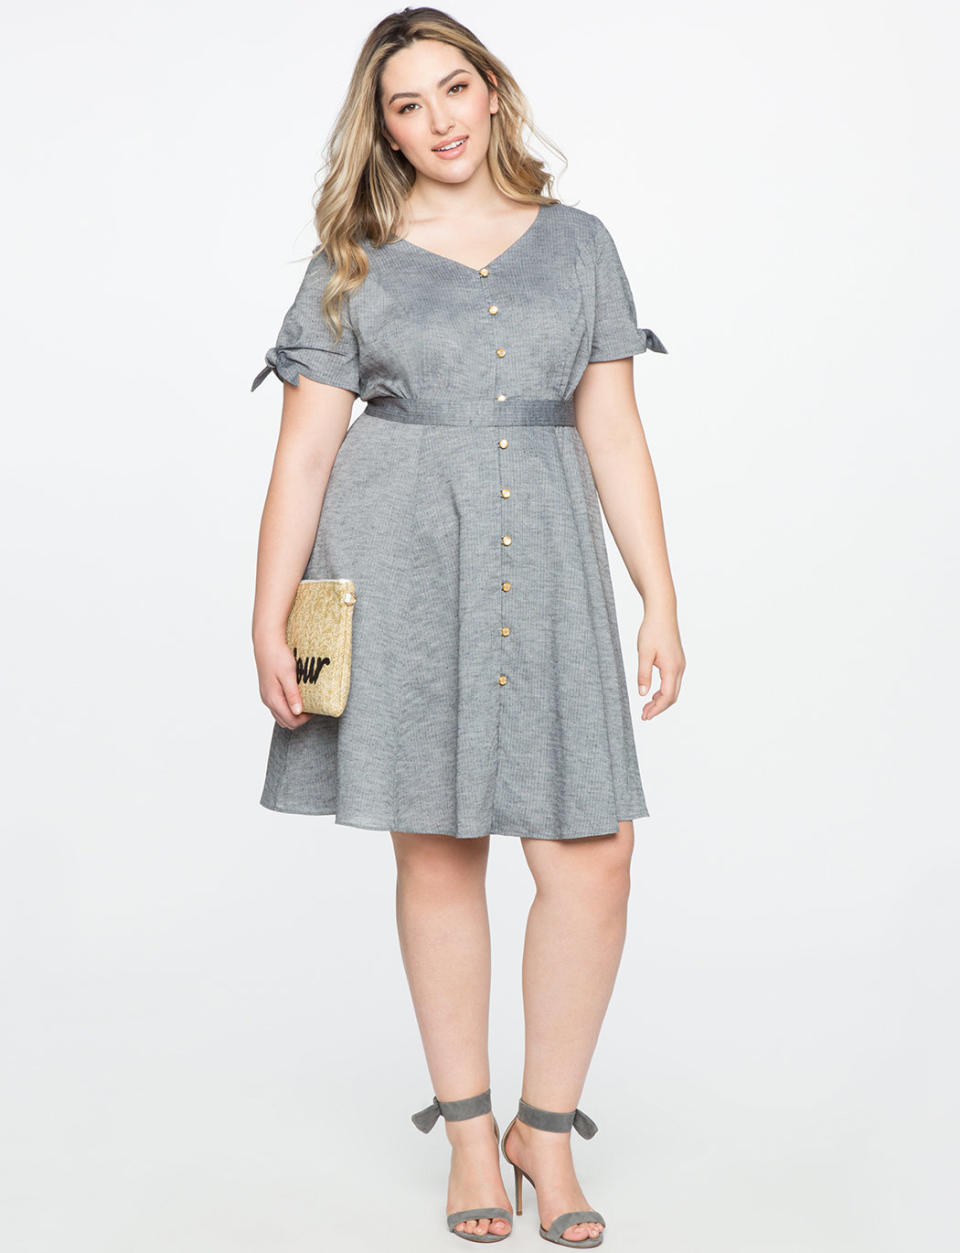 <a href="http://www.eloquii.com/button-down-fit-and-flare-dress/1234429.html?cgid=2628-dresses&amp;dwvar_1234429_colorCode=3&amp;start=189" target="_blank">Shop it at Eloquii</a>.&nbsp;